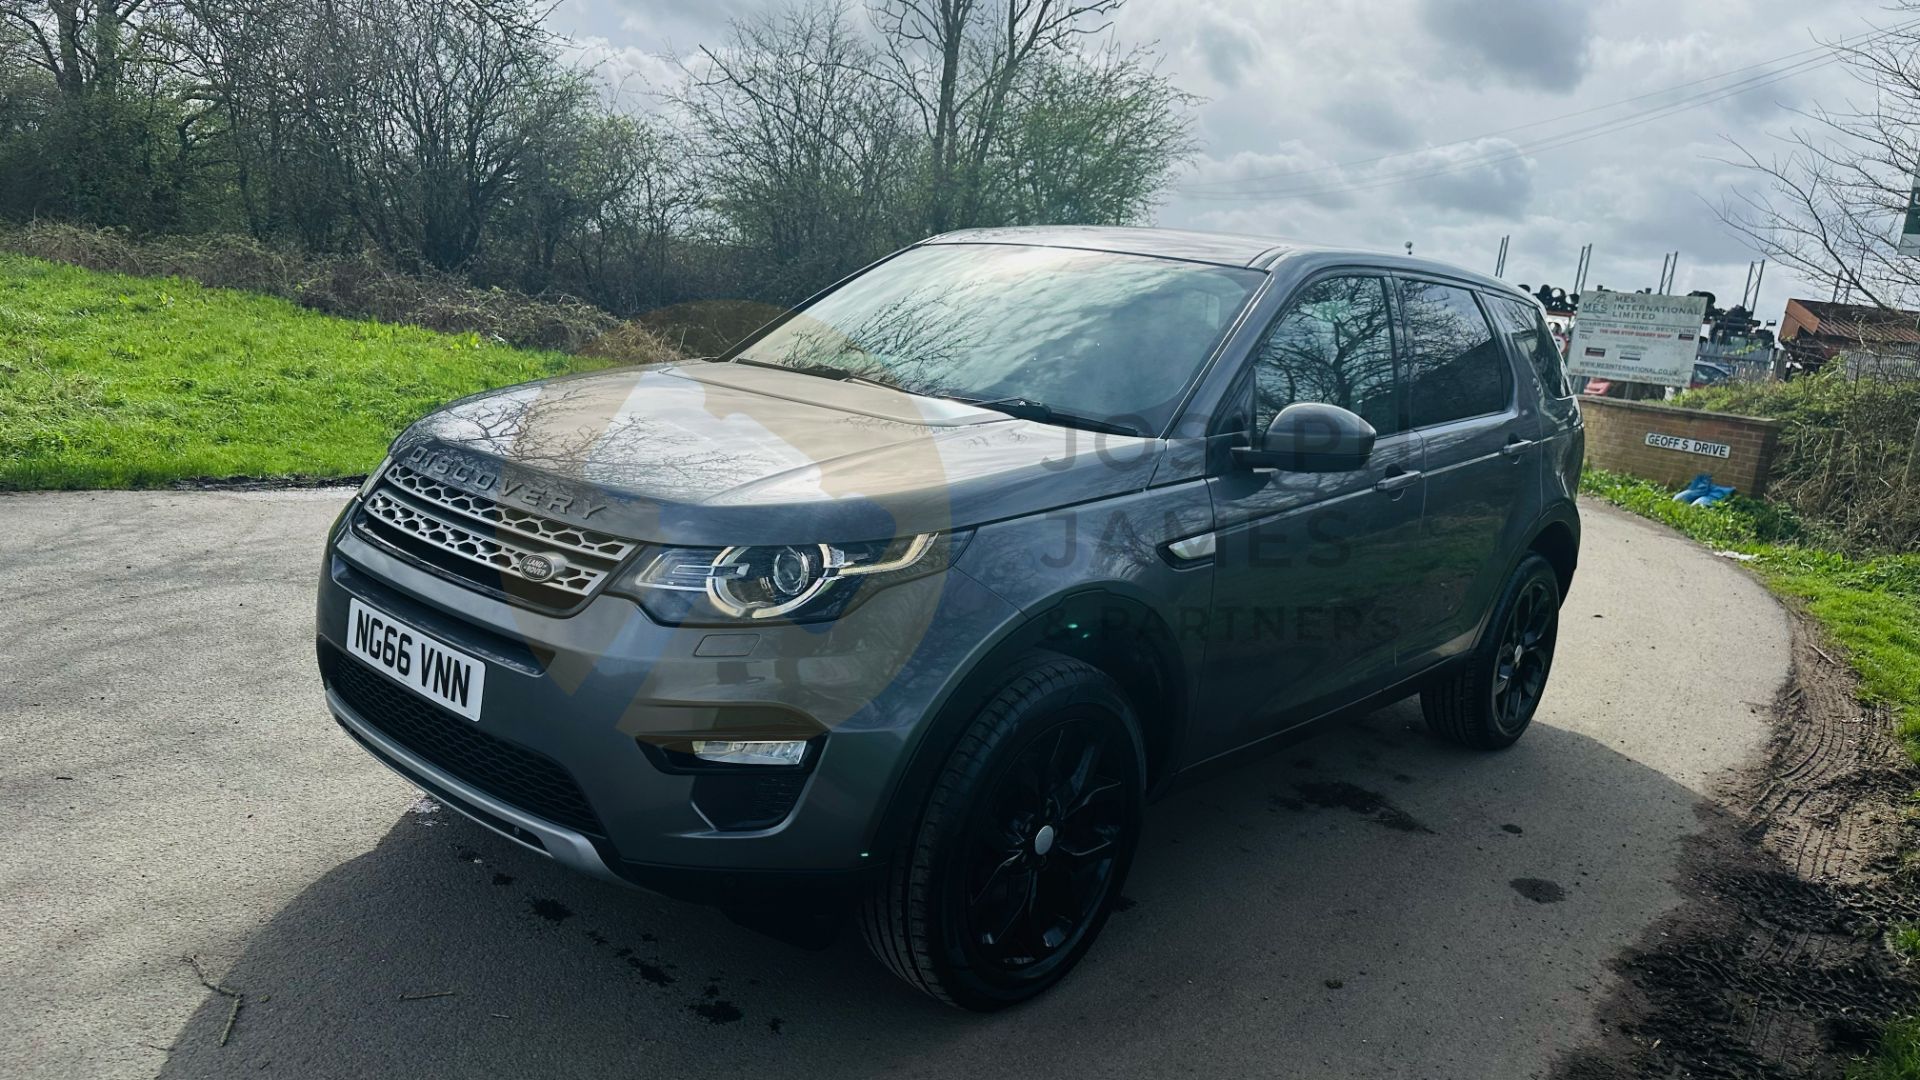 (On Sale) LAND ROVER DISCOVERY SPORT *HSE EDITION* 7 SEATER SUV (2017 - EURO 6) 2.0 TD4 - AUTOMATIC - Image 5 of 48